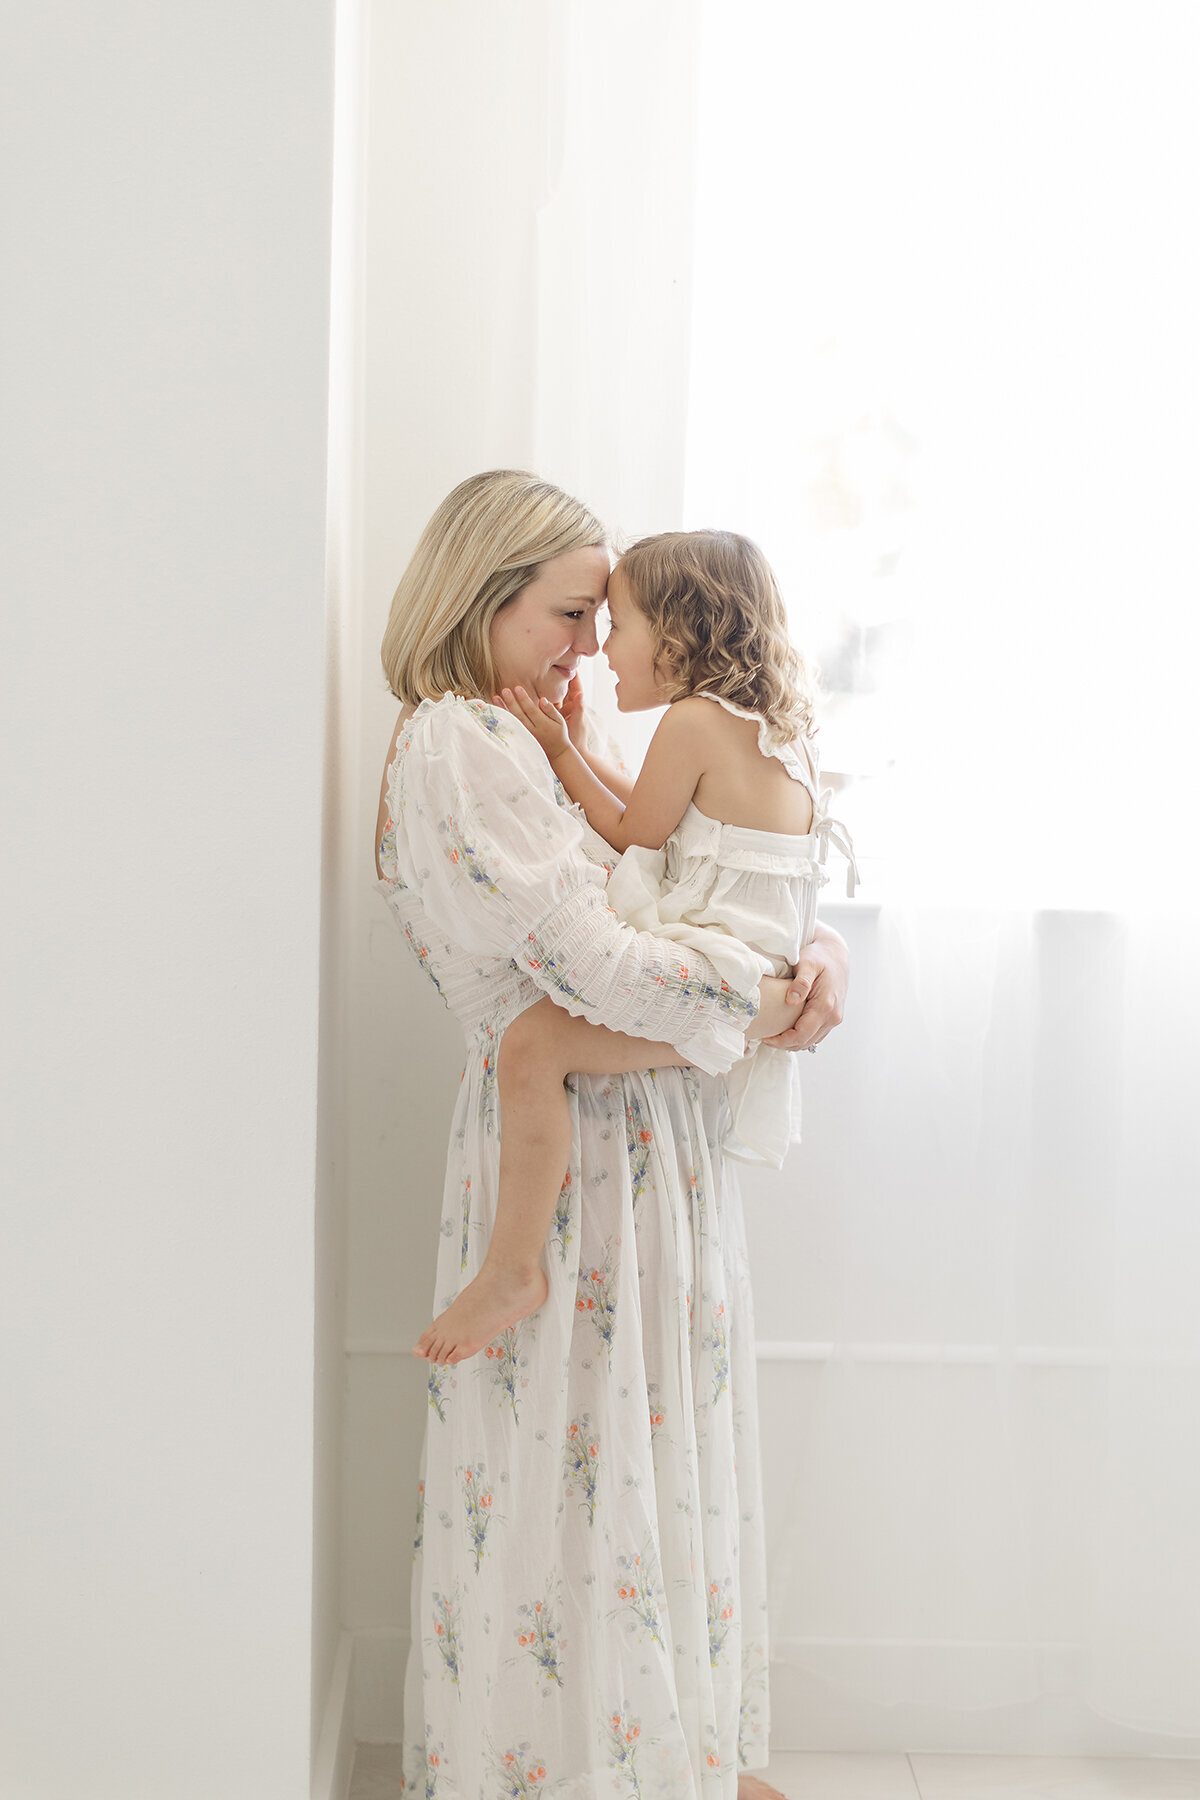 A mother standing by a window in a photography studio as she holds her toddler girl close.